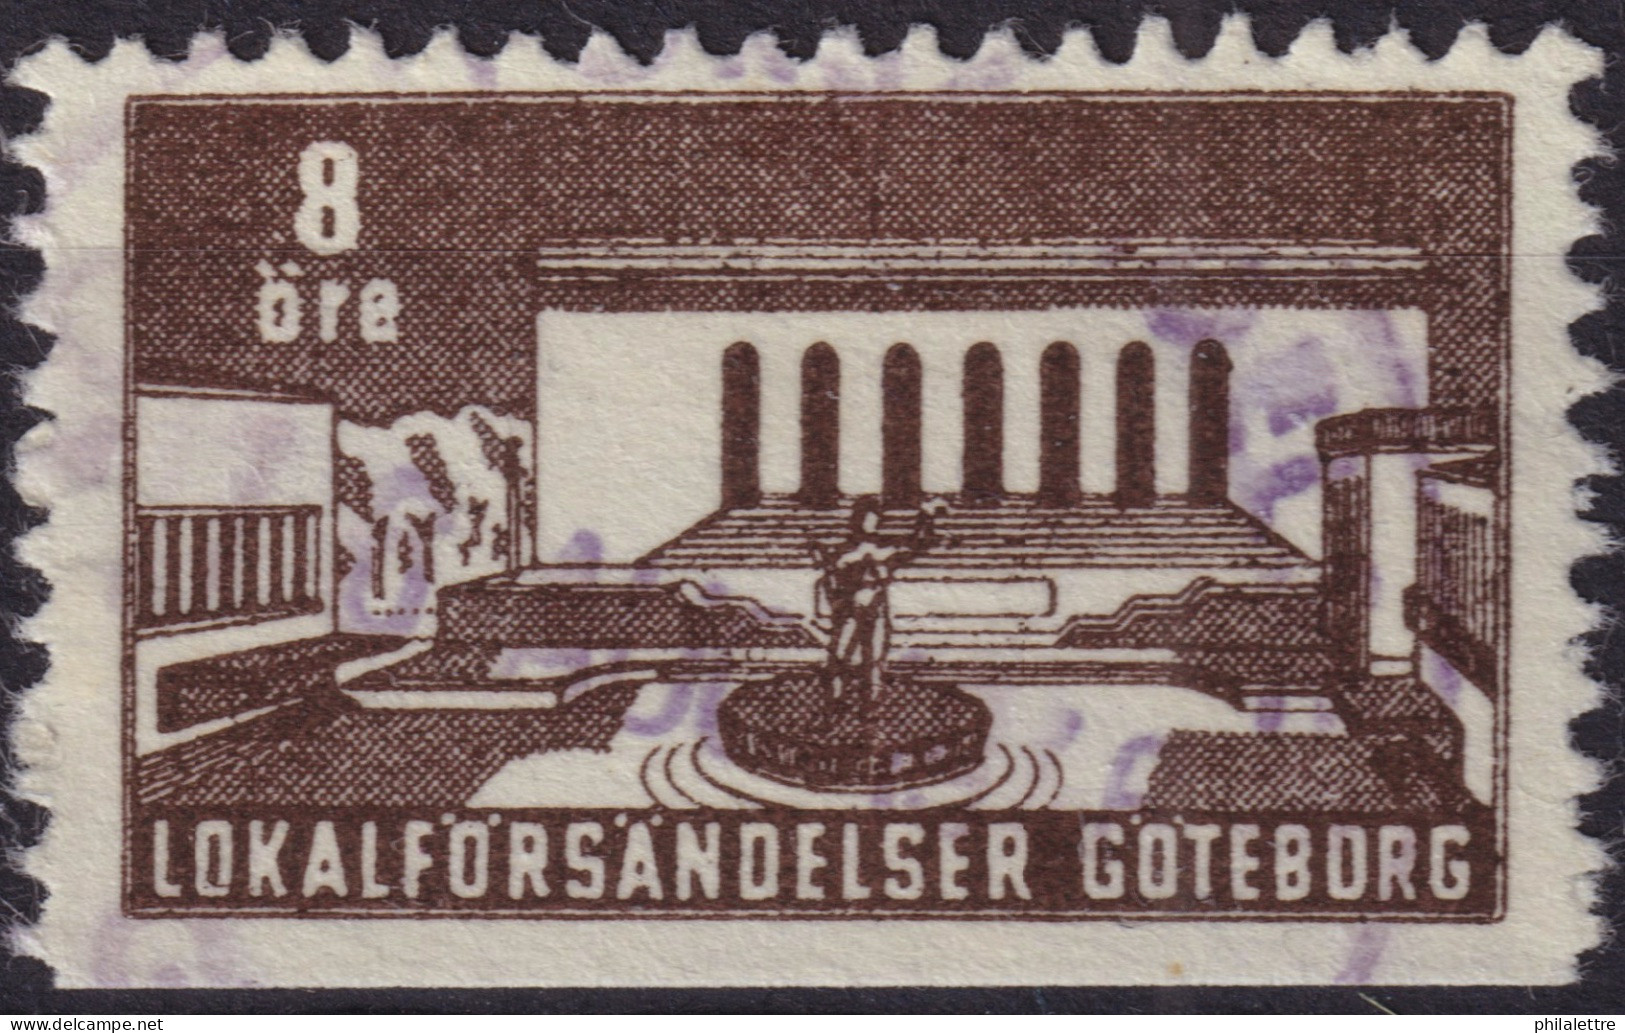 SUÈDE / SWEDEN - Local Post GÖTEBORG 8öre Brown - Very Fine Used° - Local Post Stamps